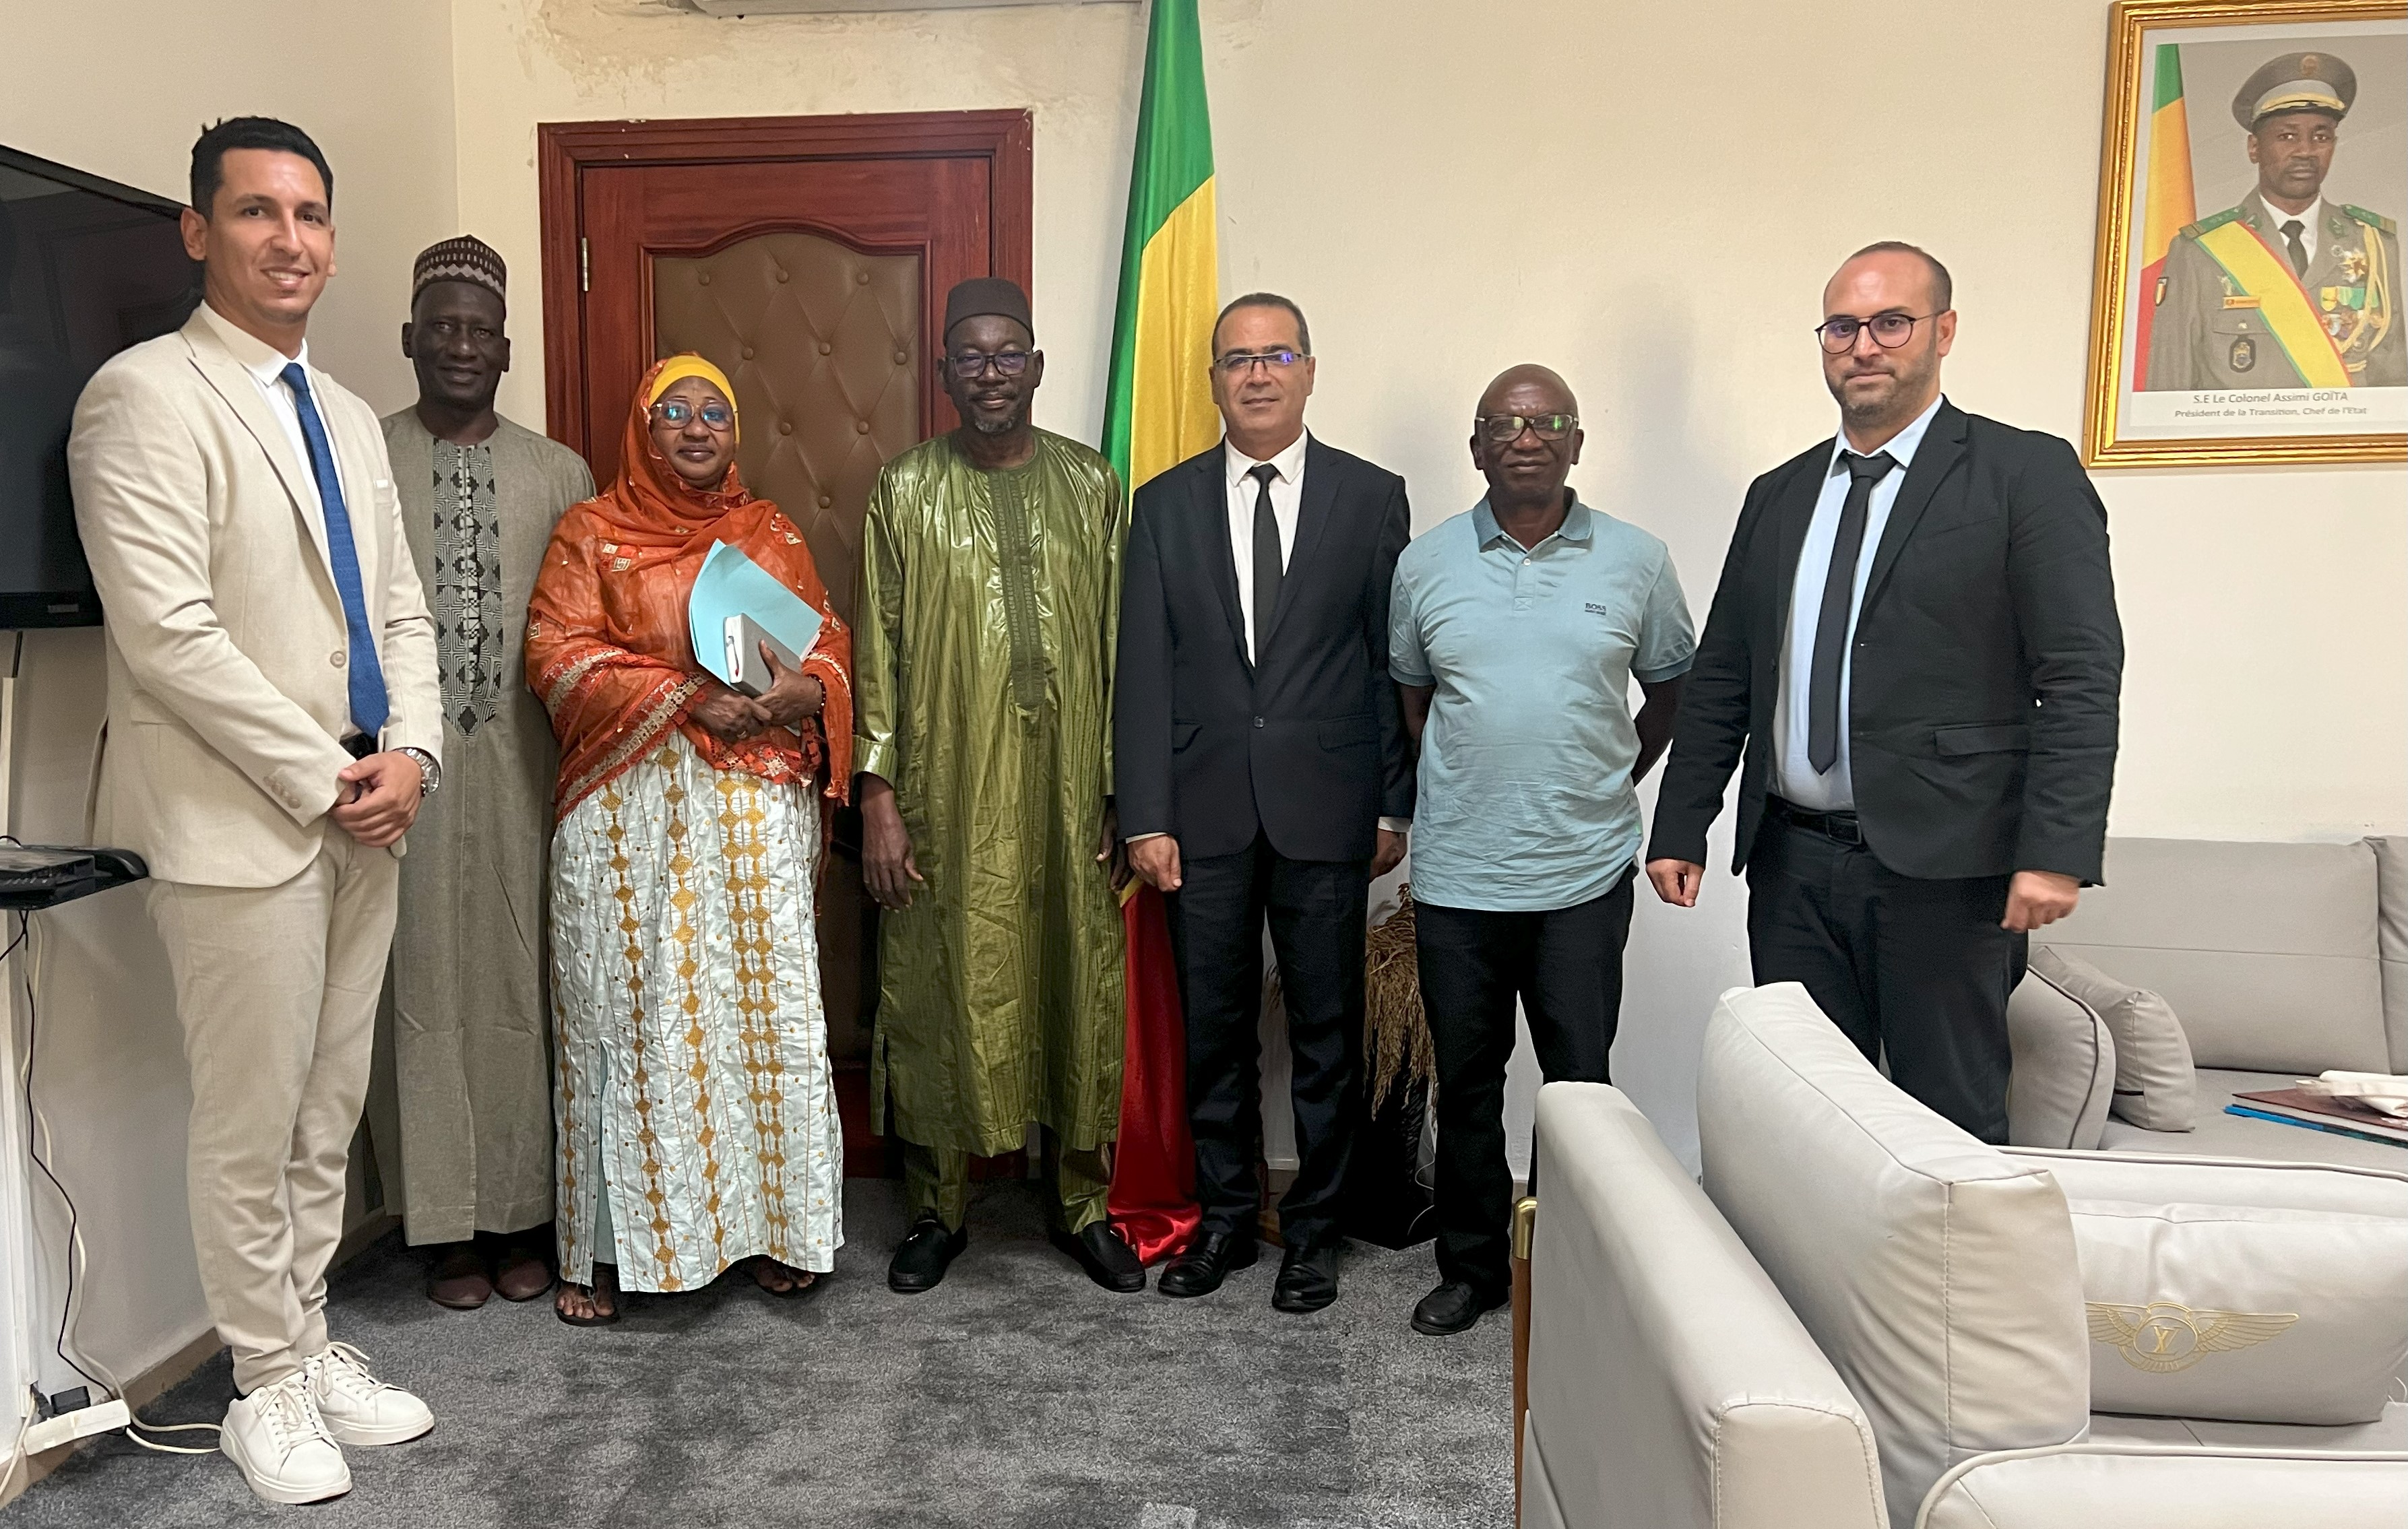  Meeting in Bamako with Mr. Lassine DEMBELE, Minister of Agriculture of Mali